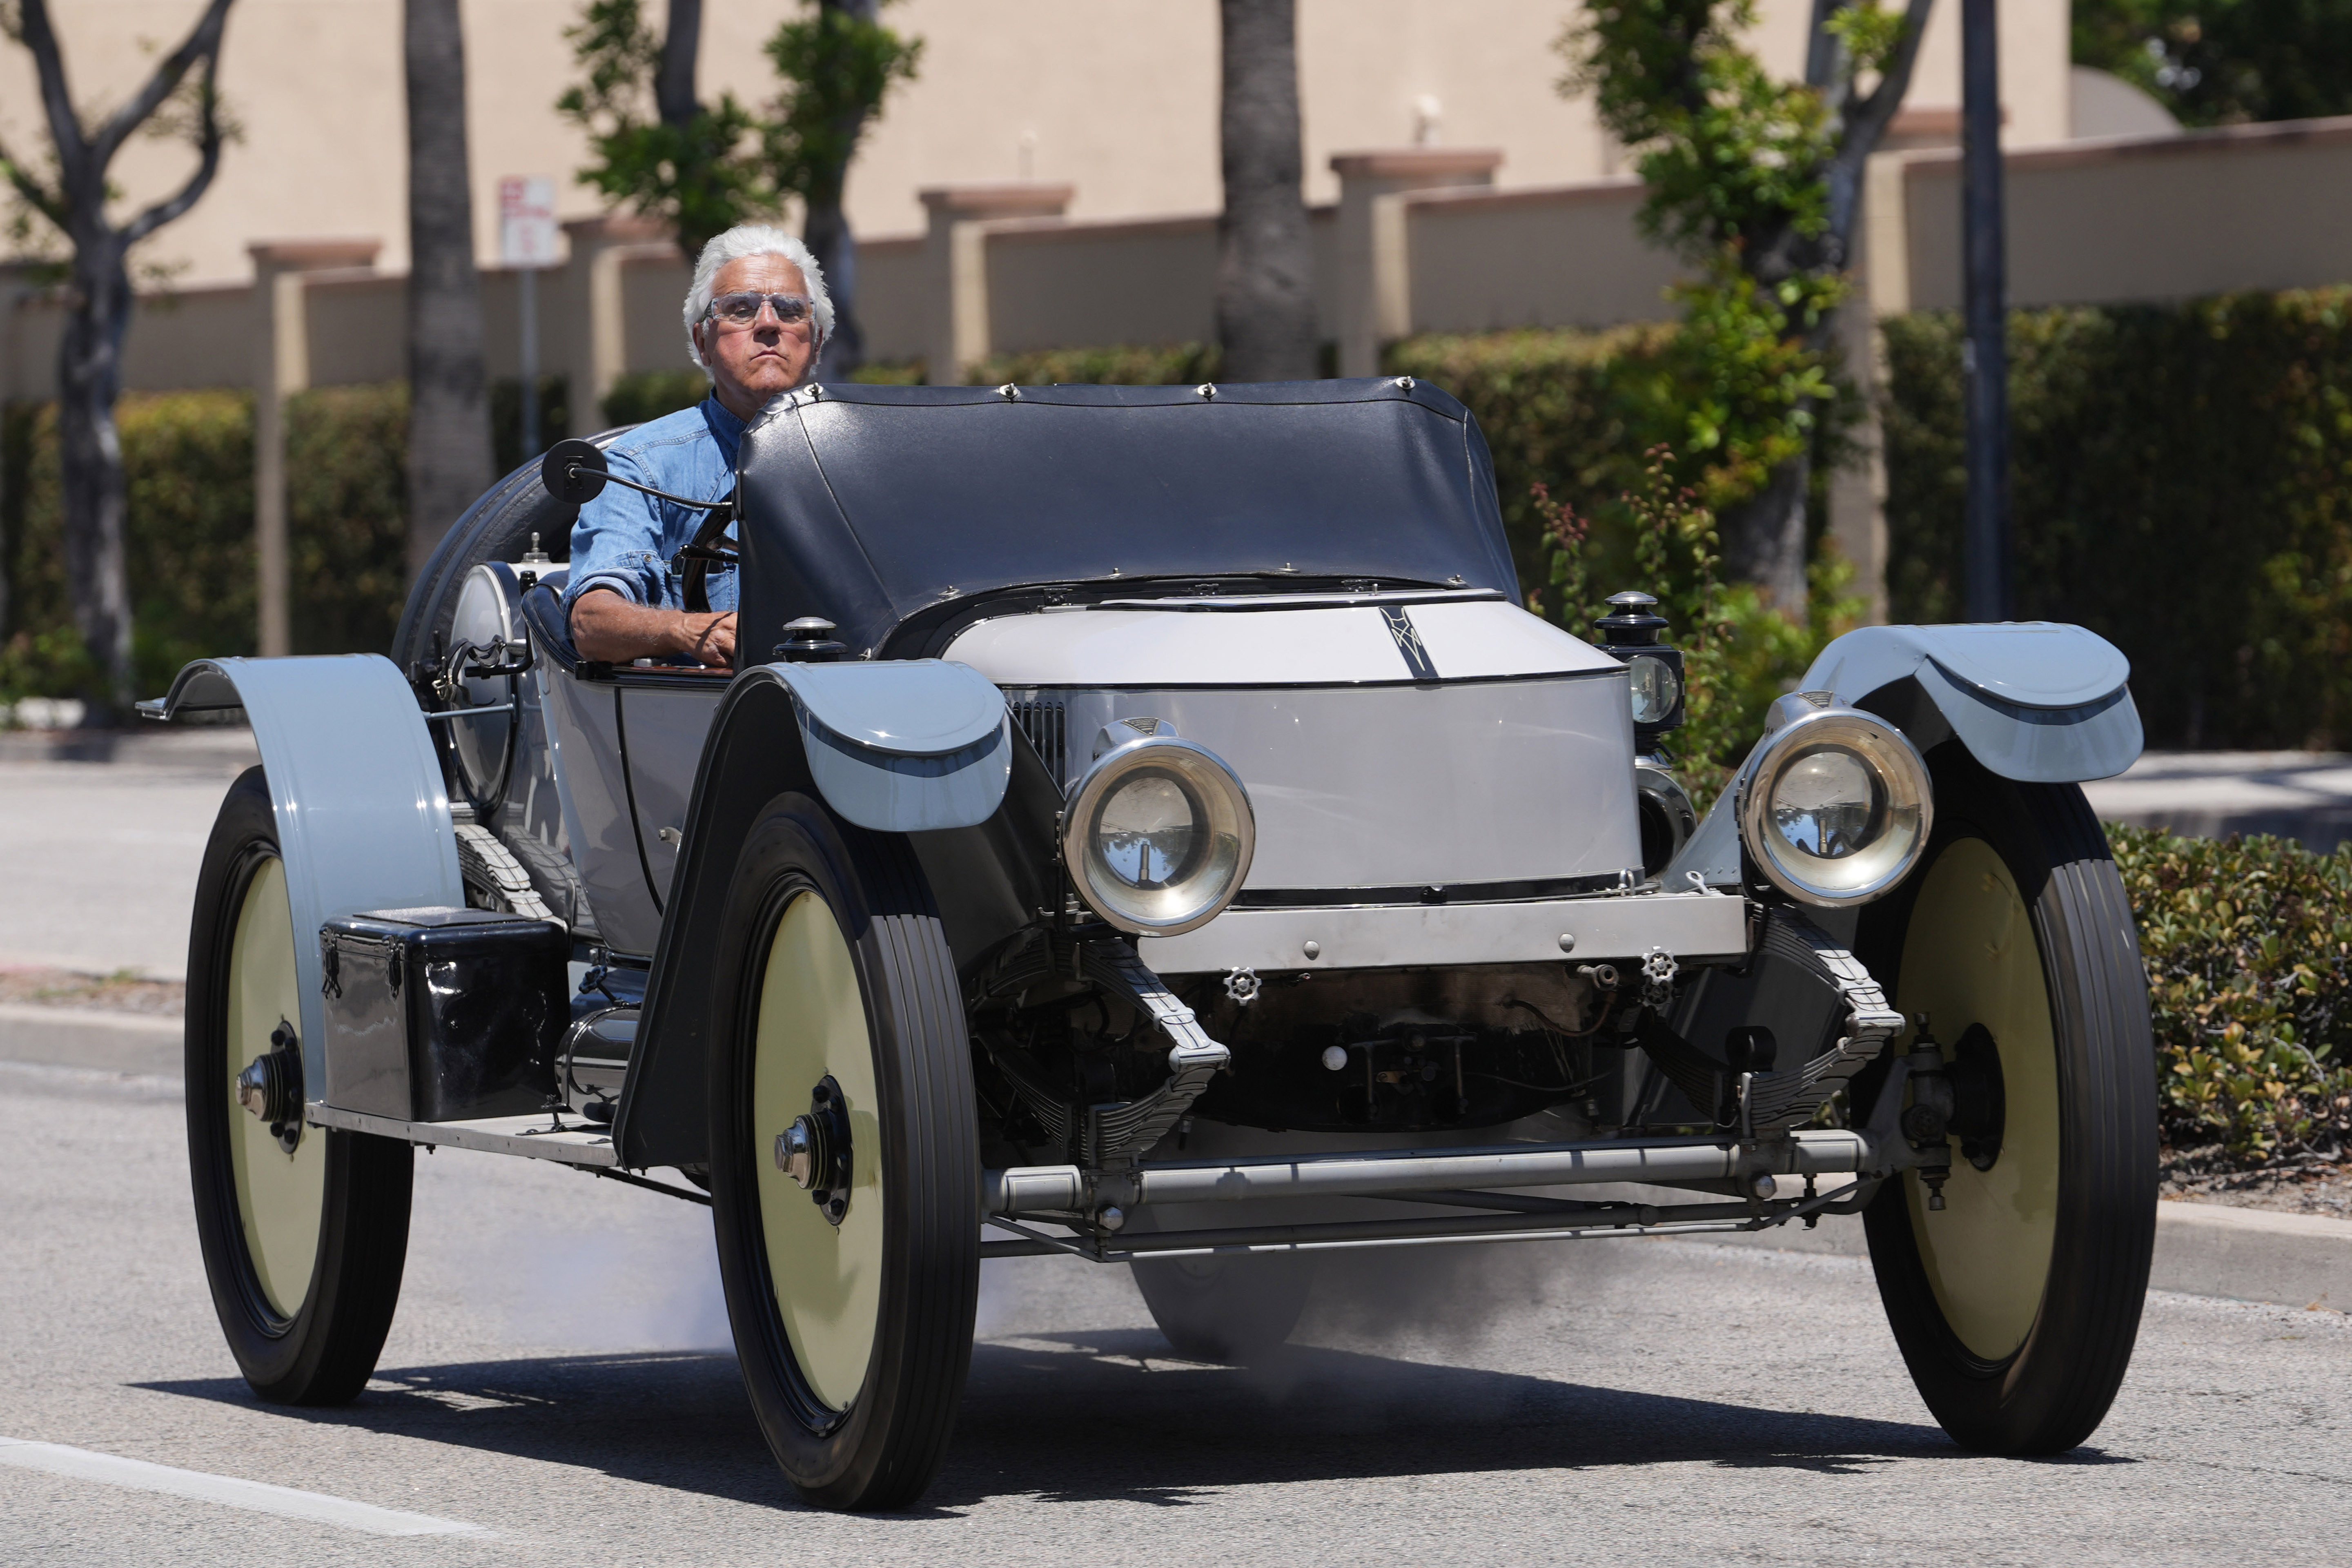 Jay Leno's Stanley Roadster, seen above, is part of a 180+ car collection valued at about $50million